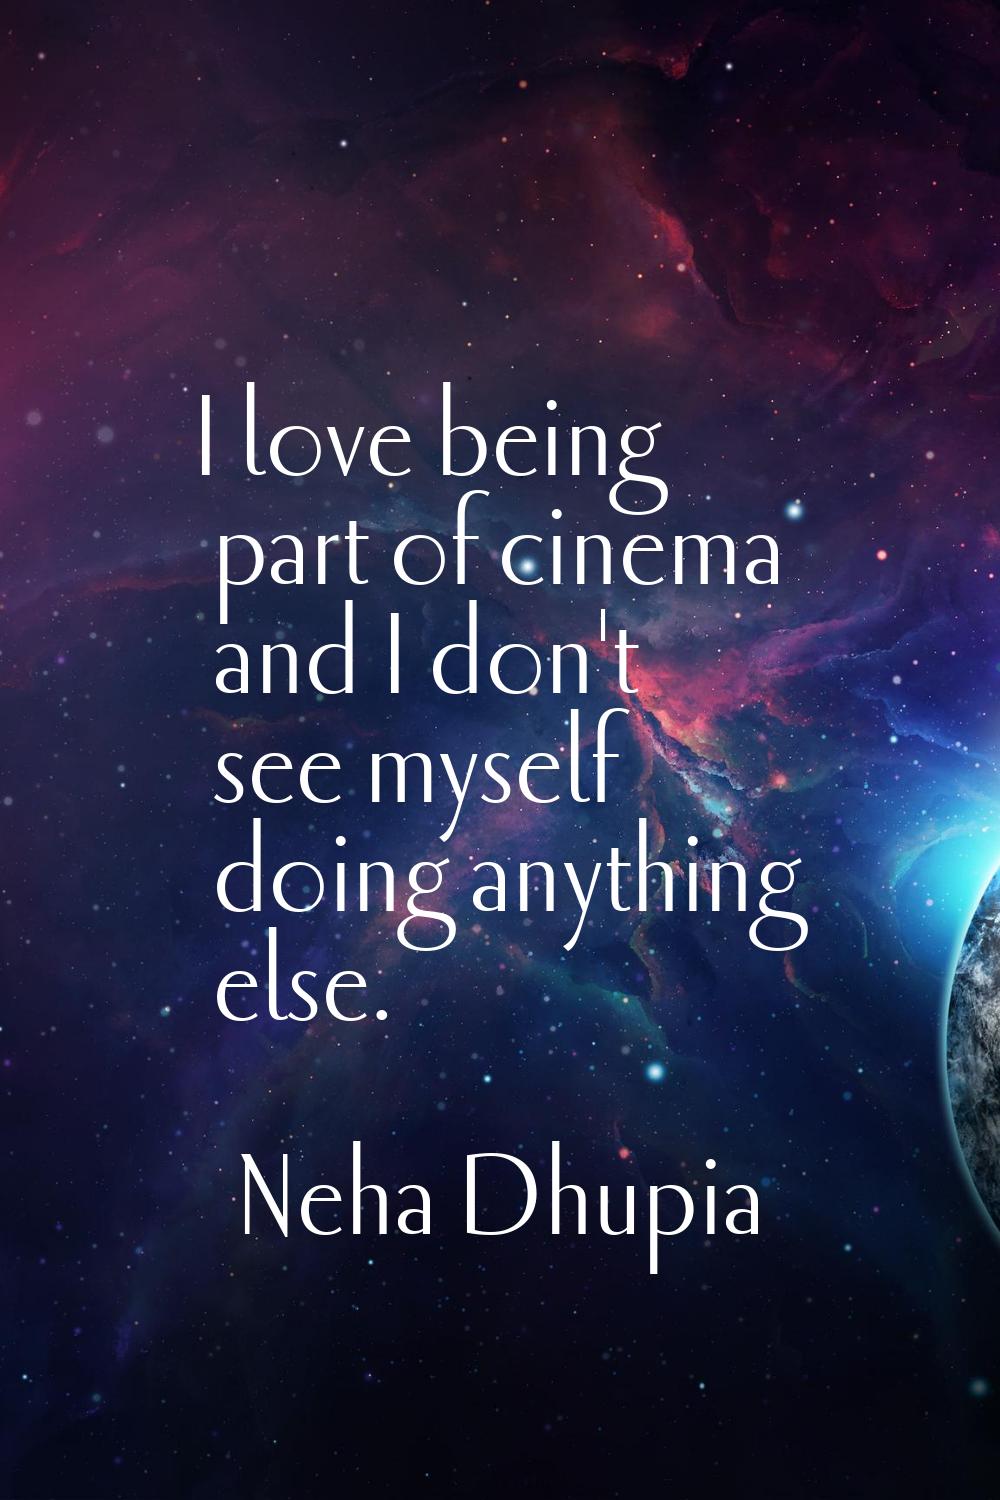 I love being part of cinema and I don't see myself doing anything else.